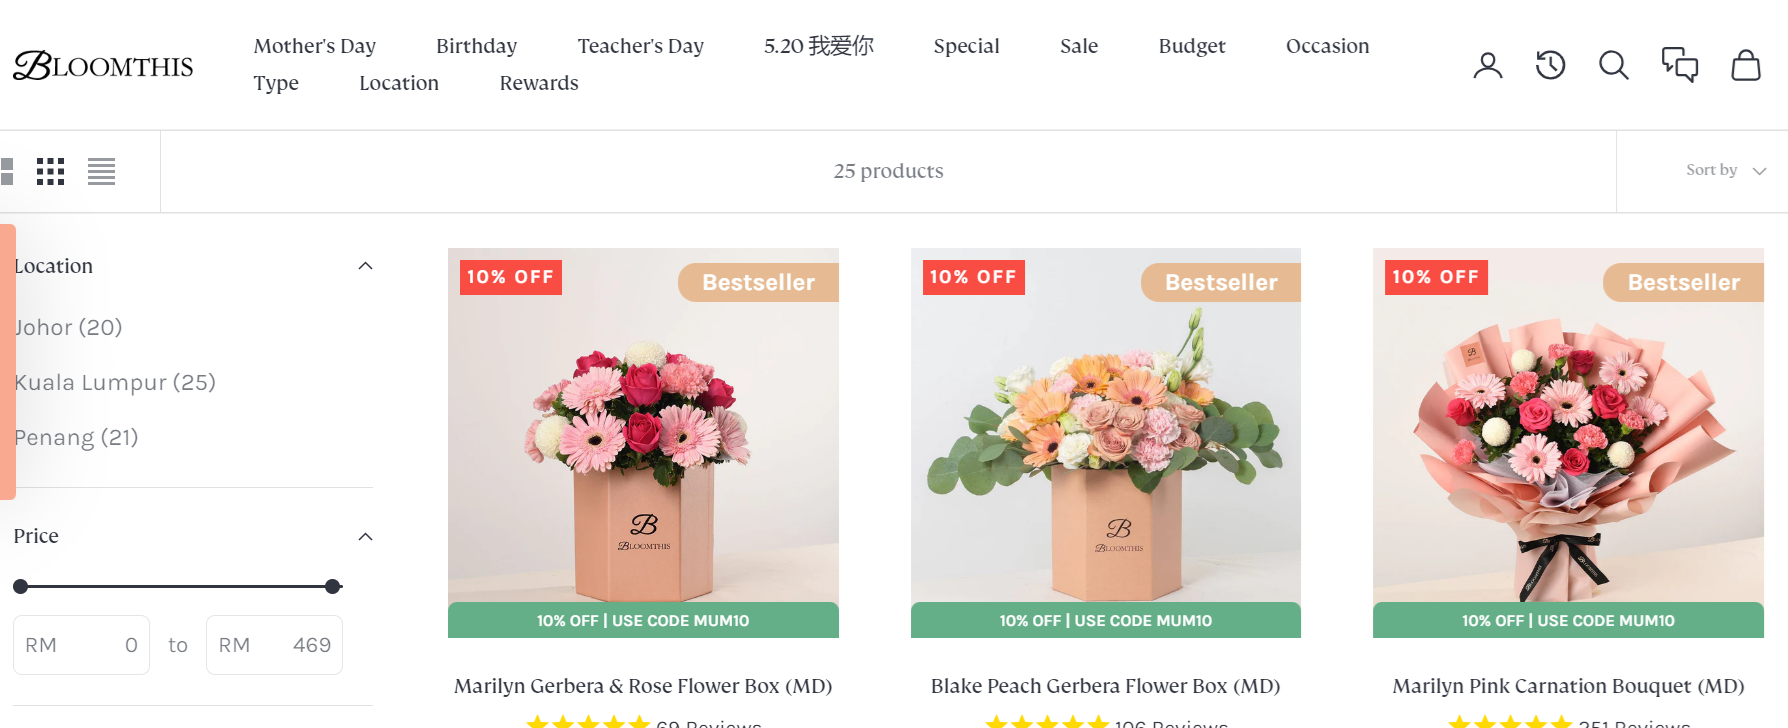 bloomthis-collection-mothers-day